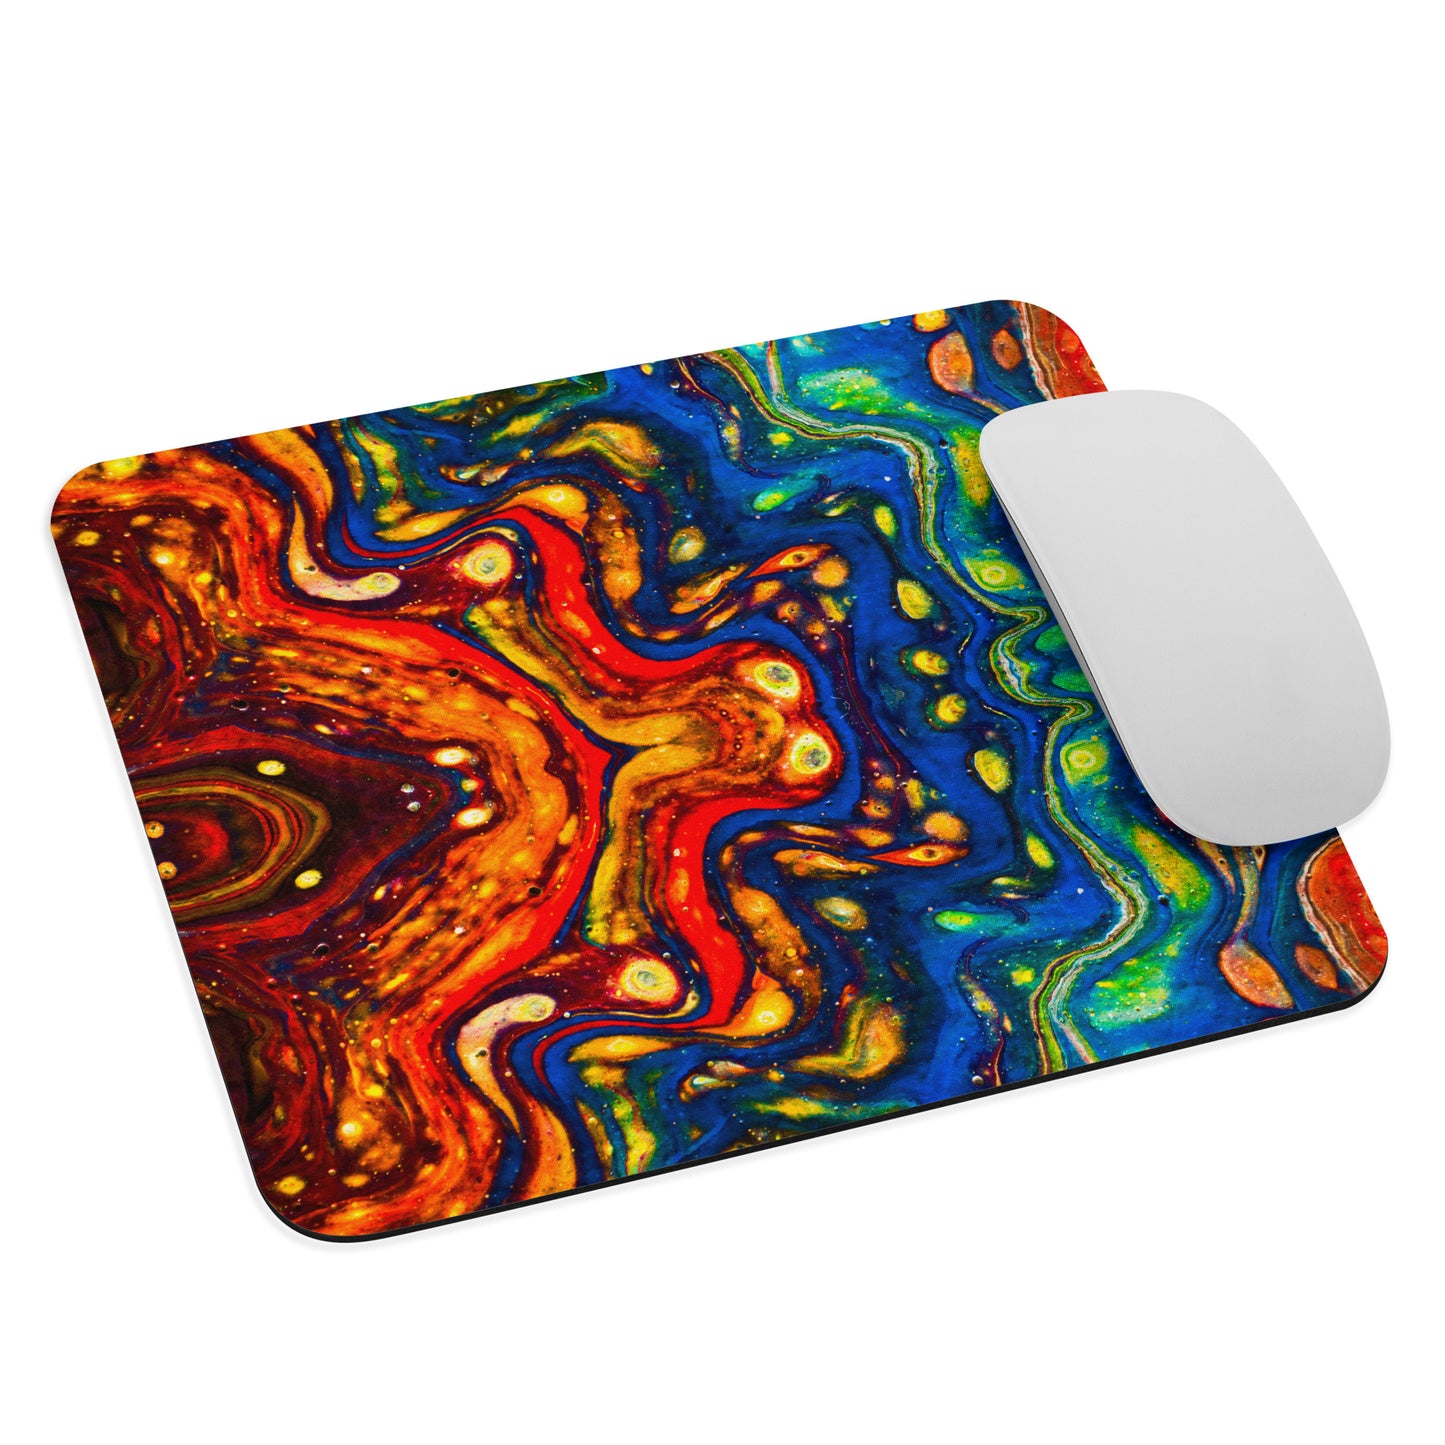 NightOwl Studio Abstract Mouse Pad, Soft Polyester Surface, Slim Natural Rubber Base, Supreme Grip, Color Dragon